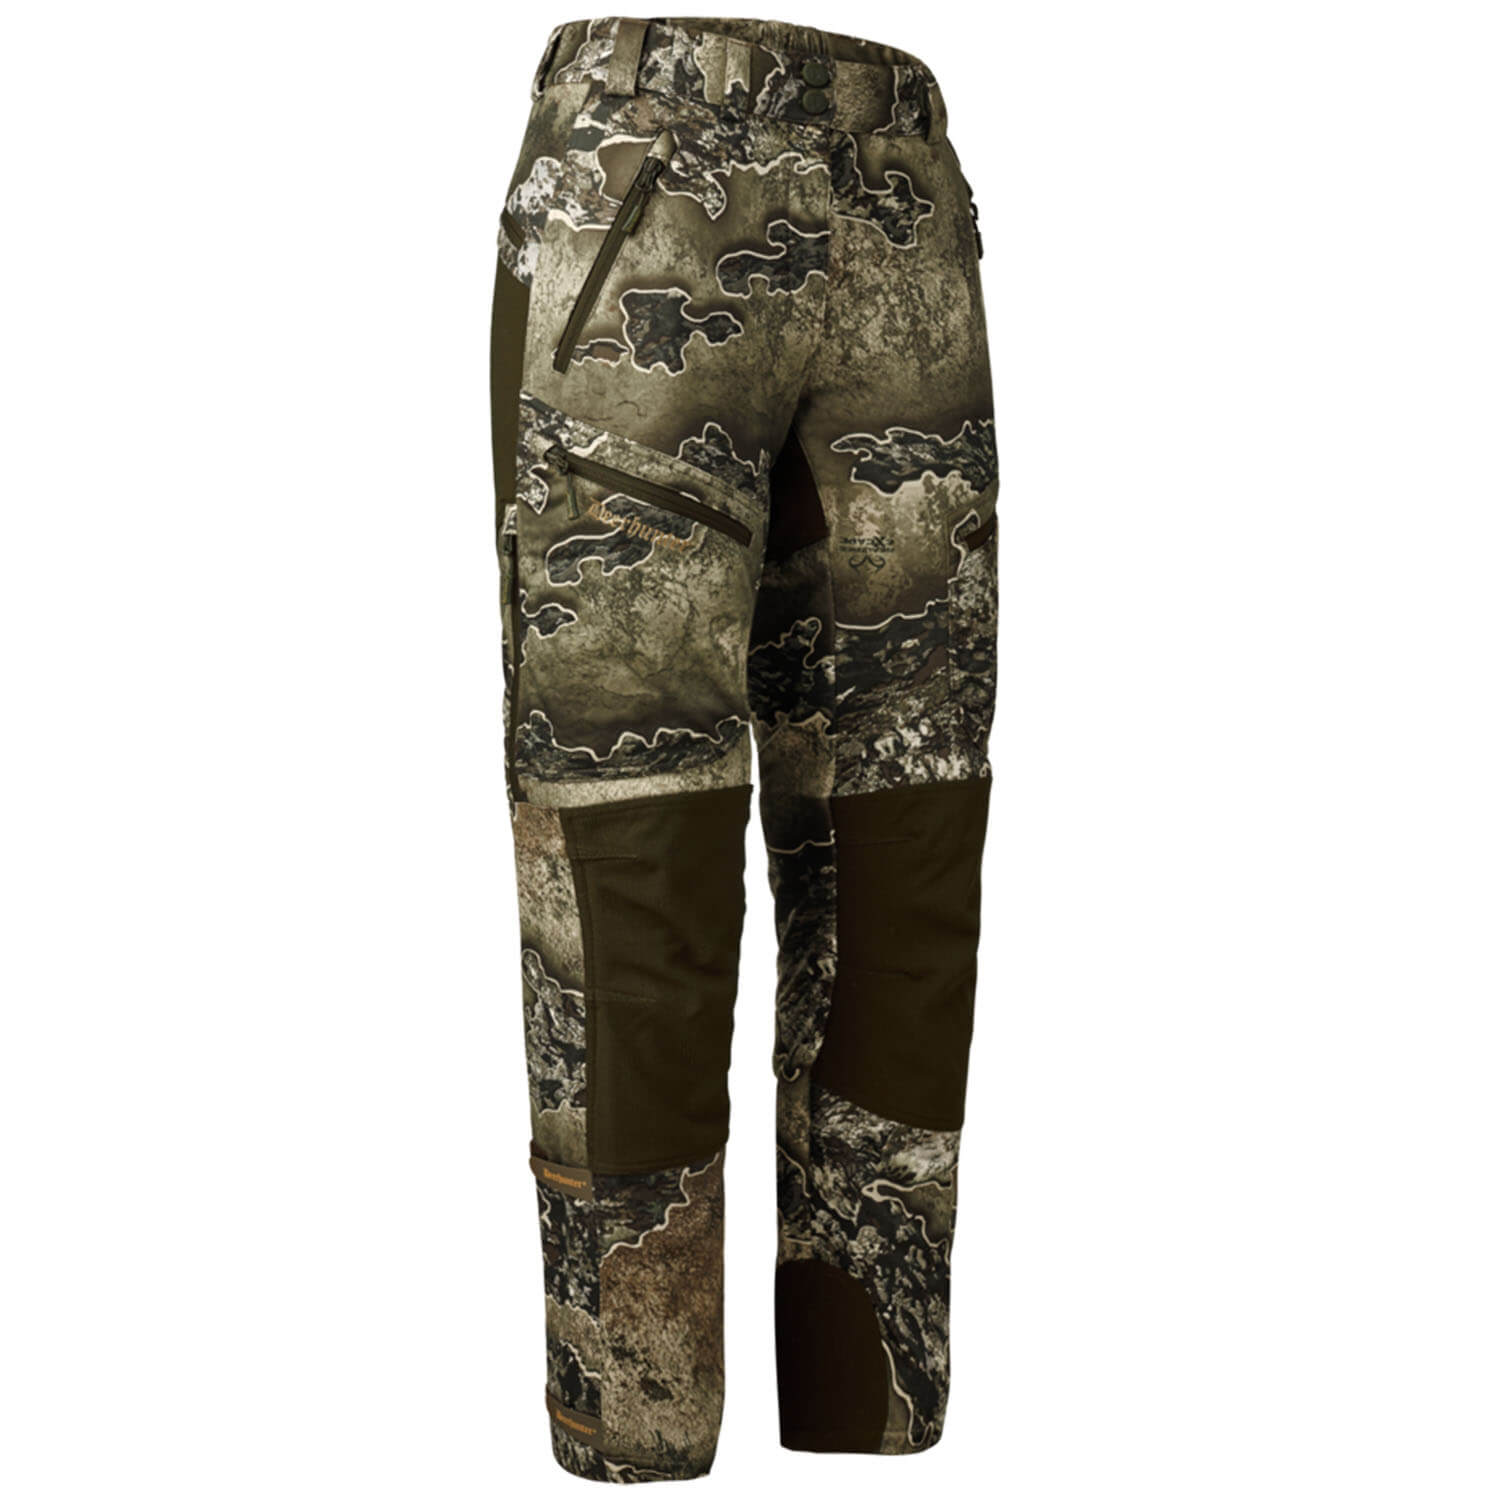 Deerhunter Softshell Trousers Lady Excape (realtree excape) - For Ladies